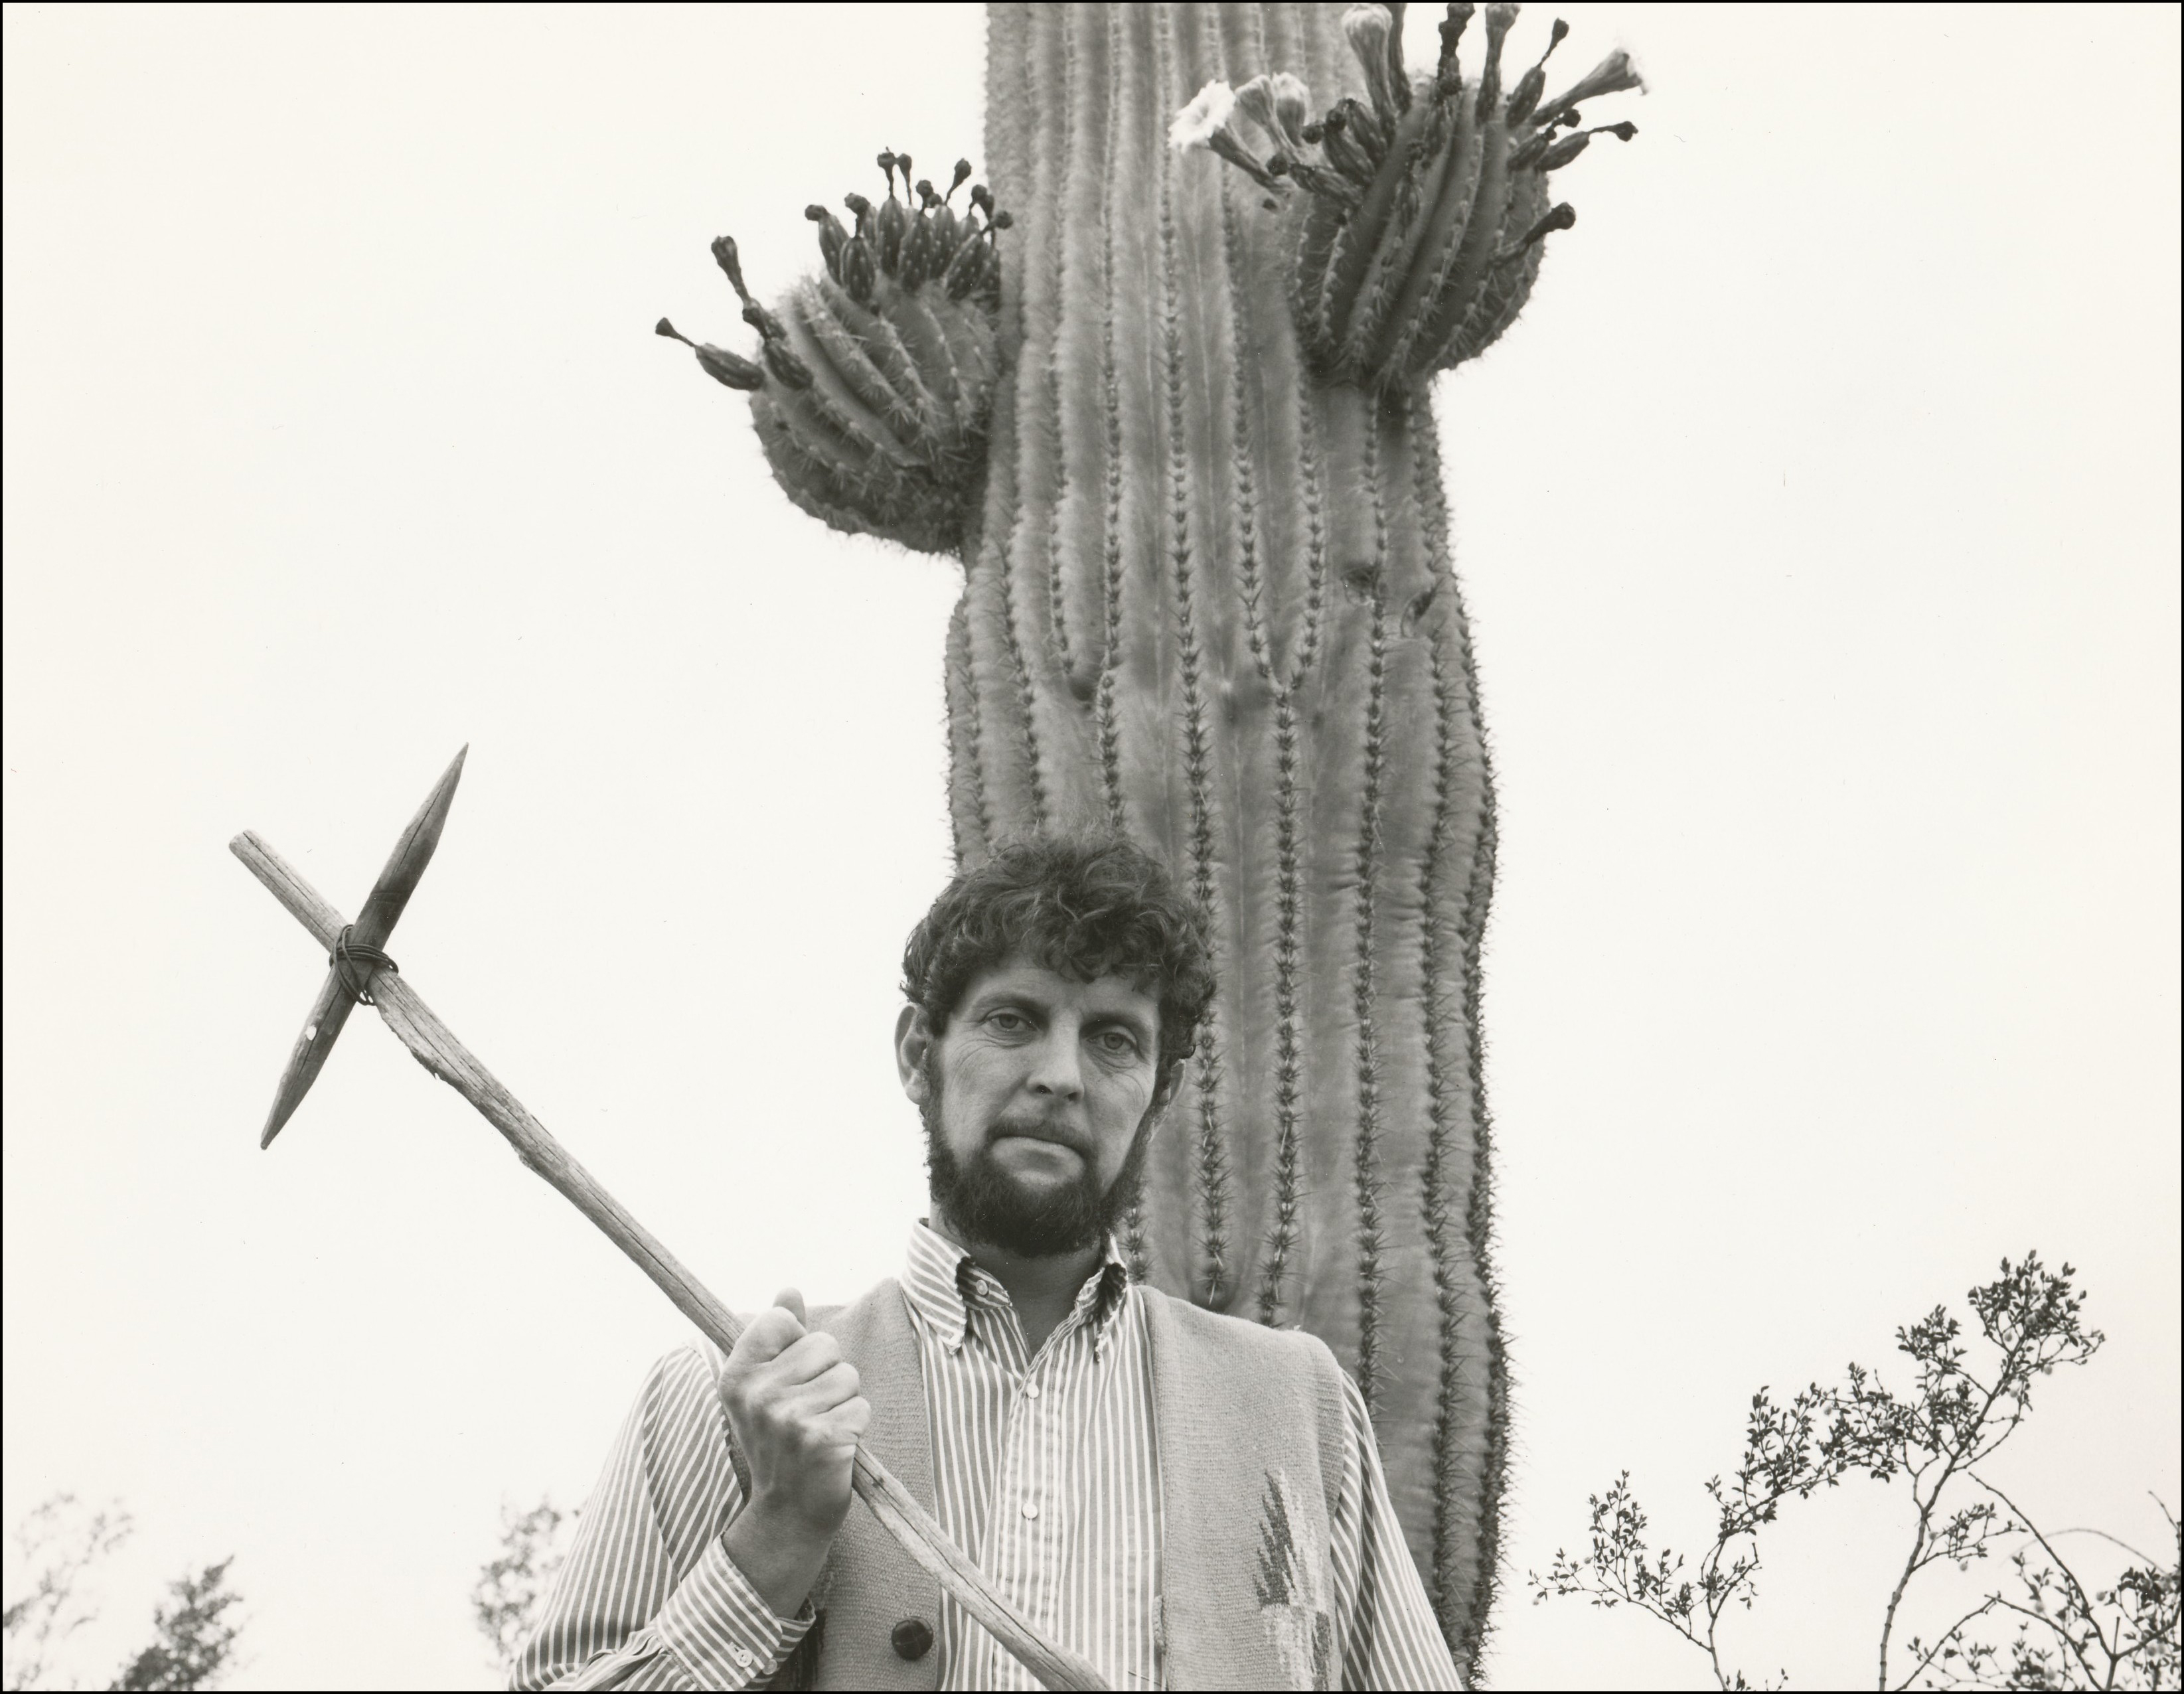 Man holding wooden cross standing in front of large saguaro cactus